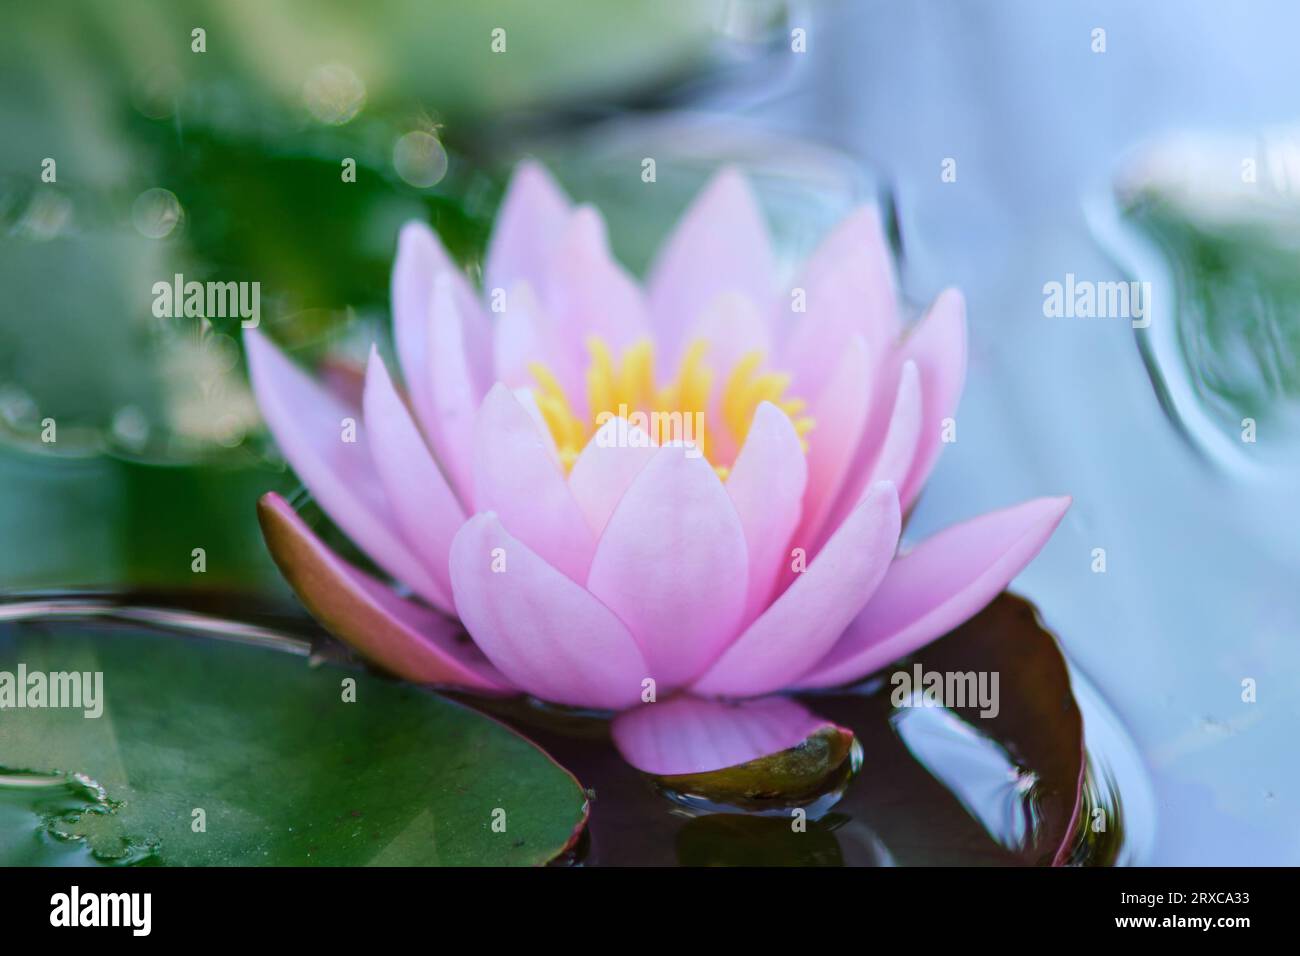 Beautiful pink waterlily or lotus flower in the pond Stock Photo